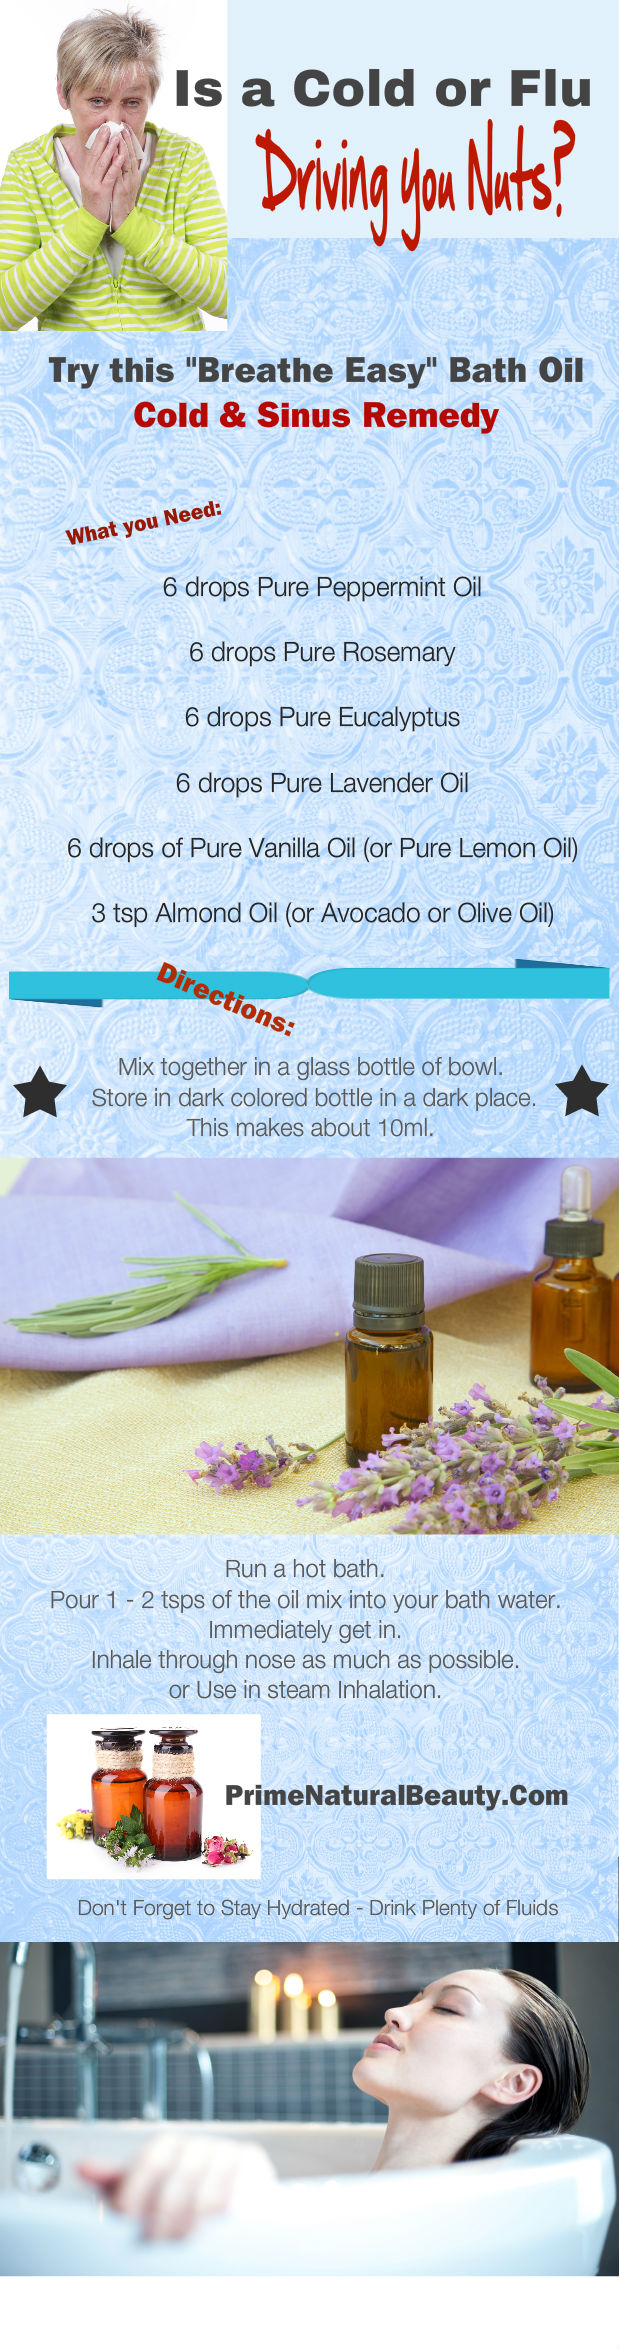 Cold and Flu Remedy Bath Oil infographic